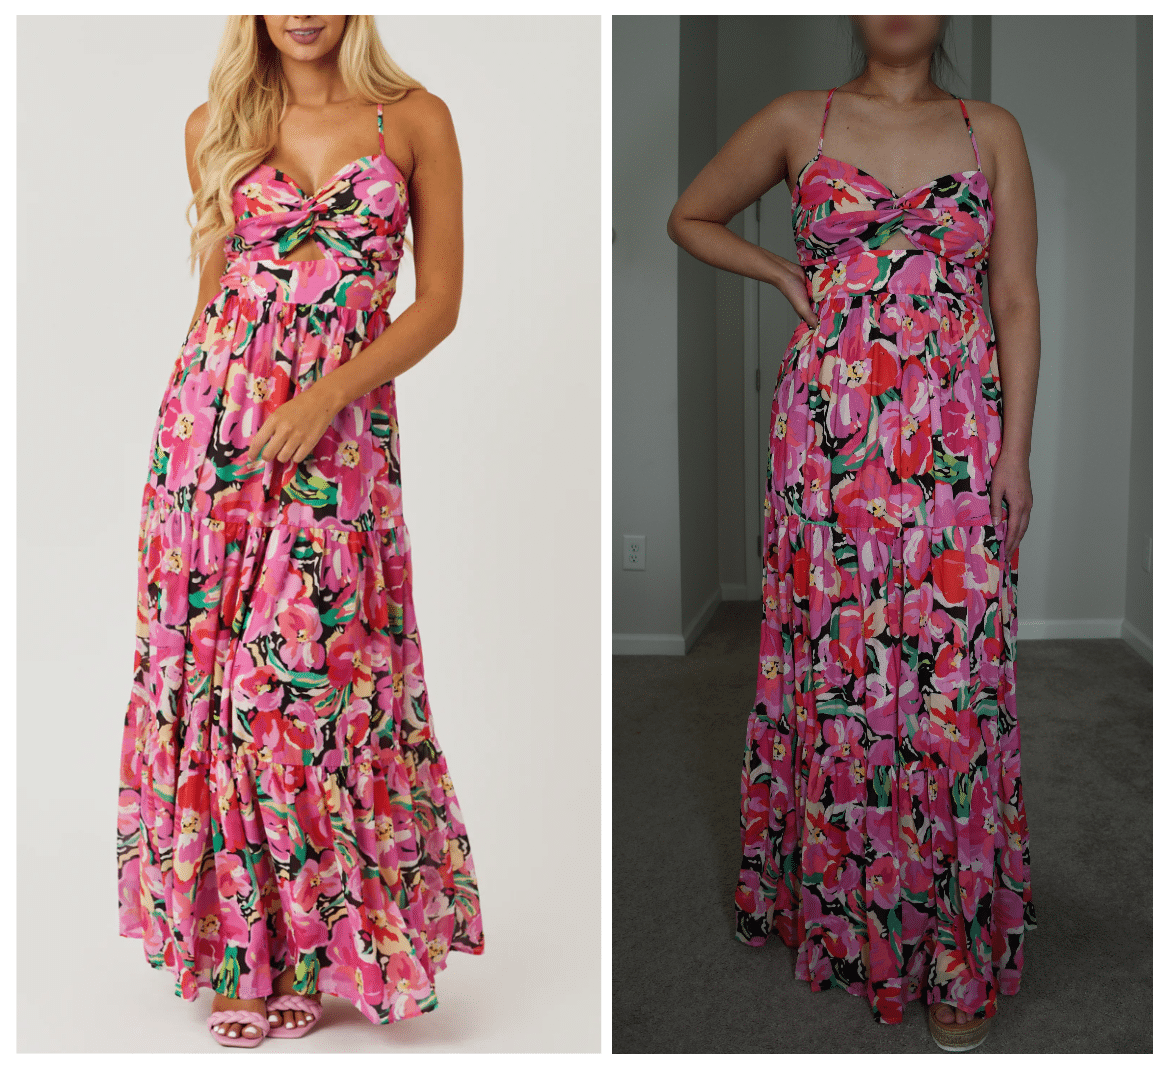 lime lush flying tomato floral dress comparison